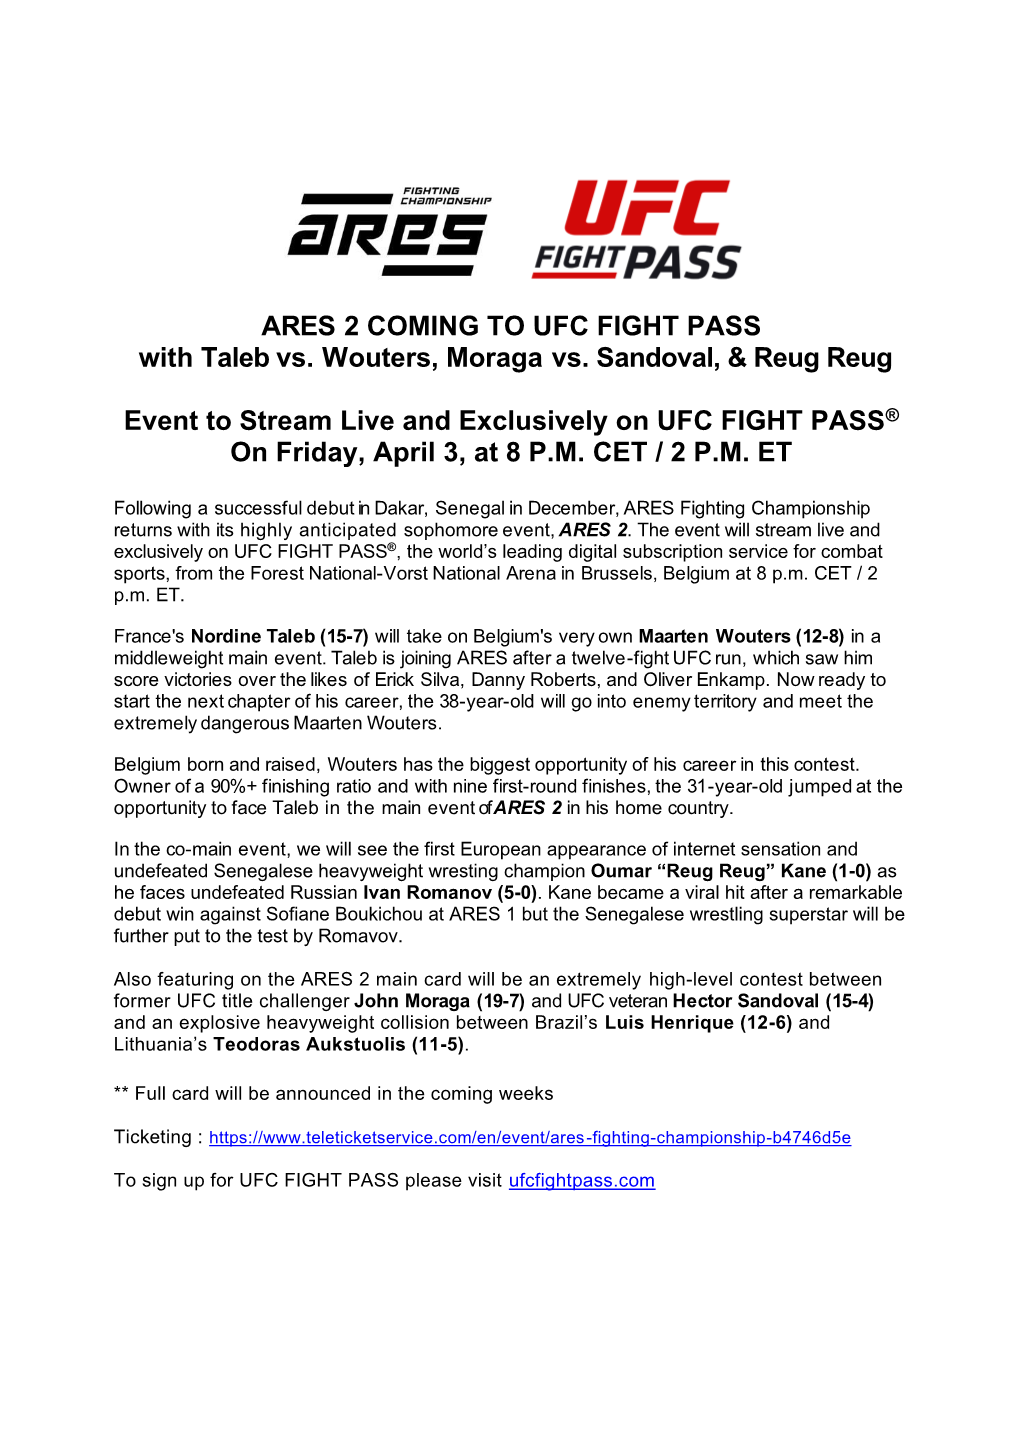 29 Feb ARES 2 Coming to UFC Fight Pass February 29, 2020